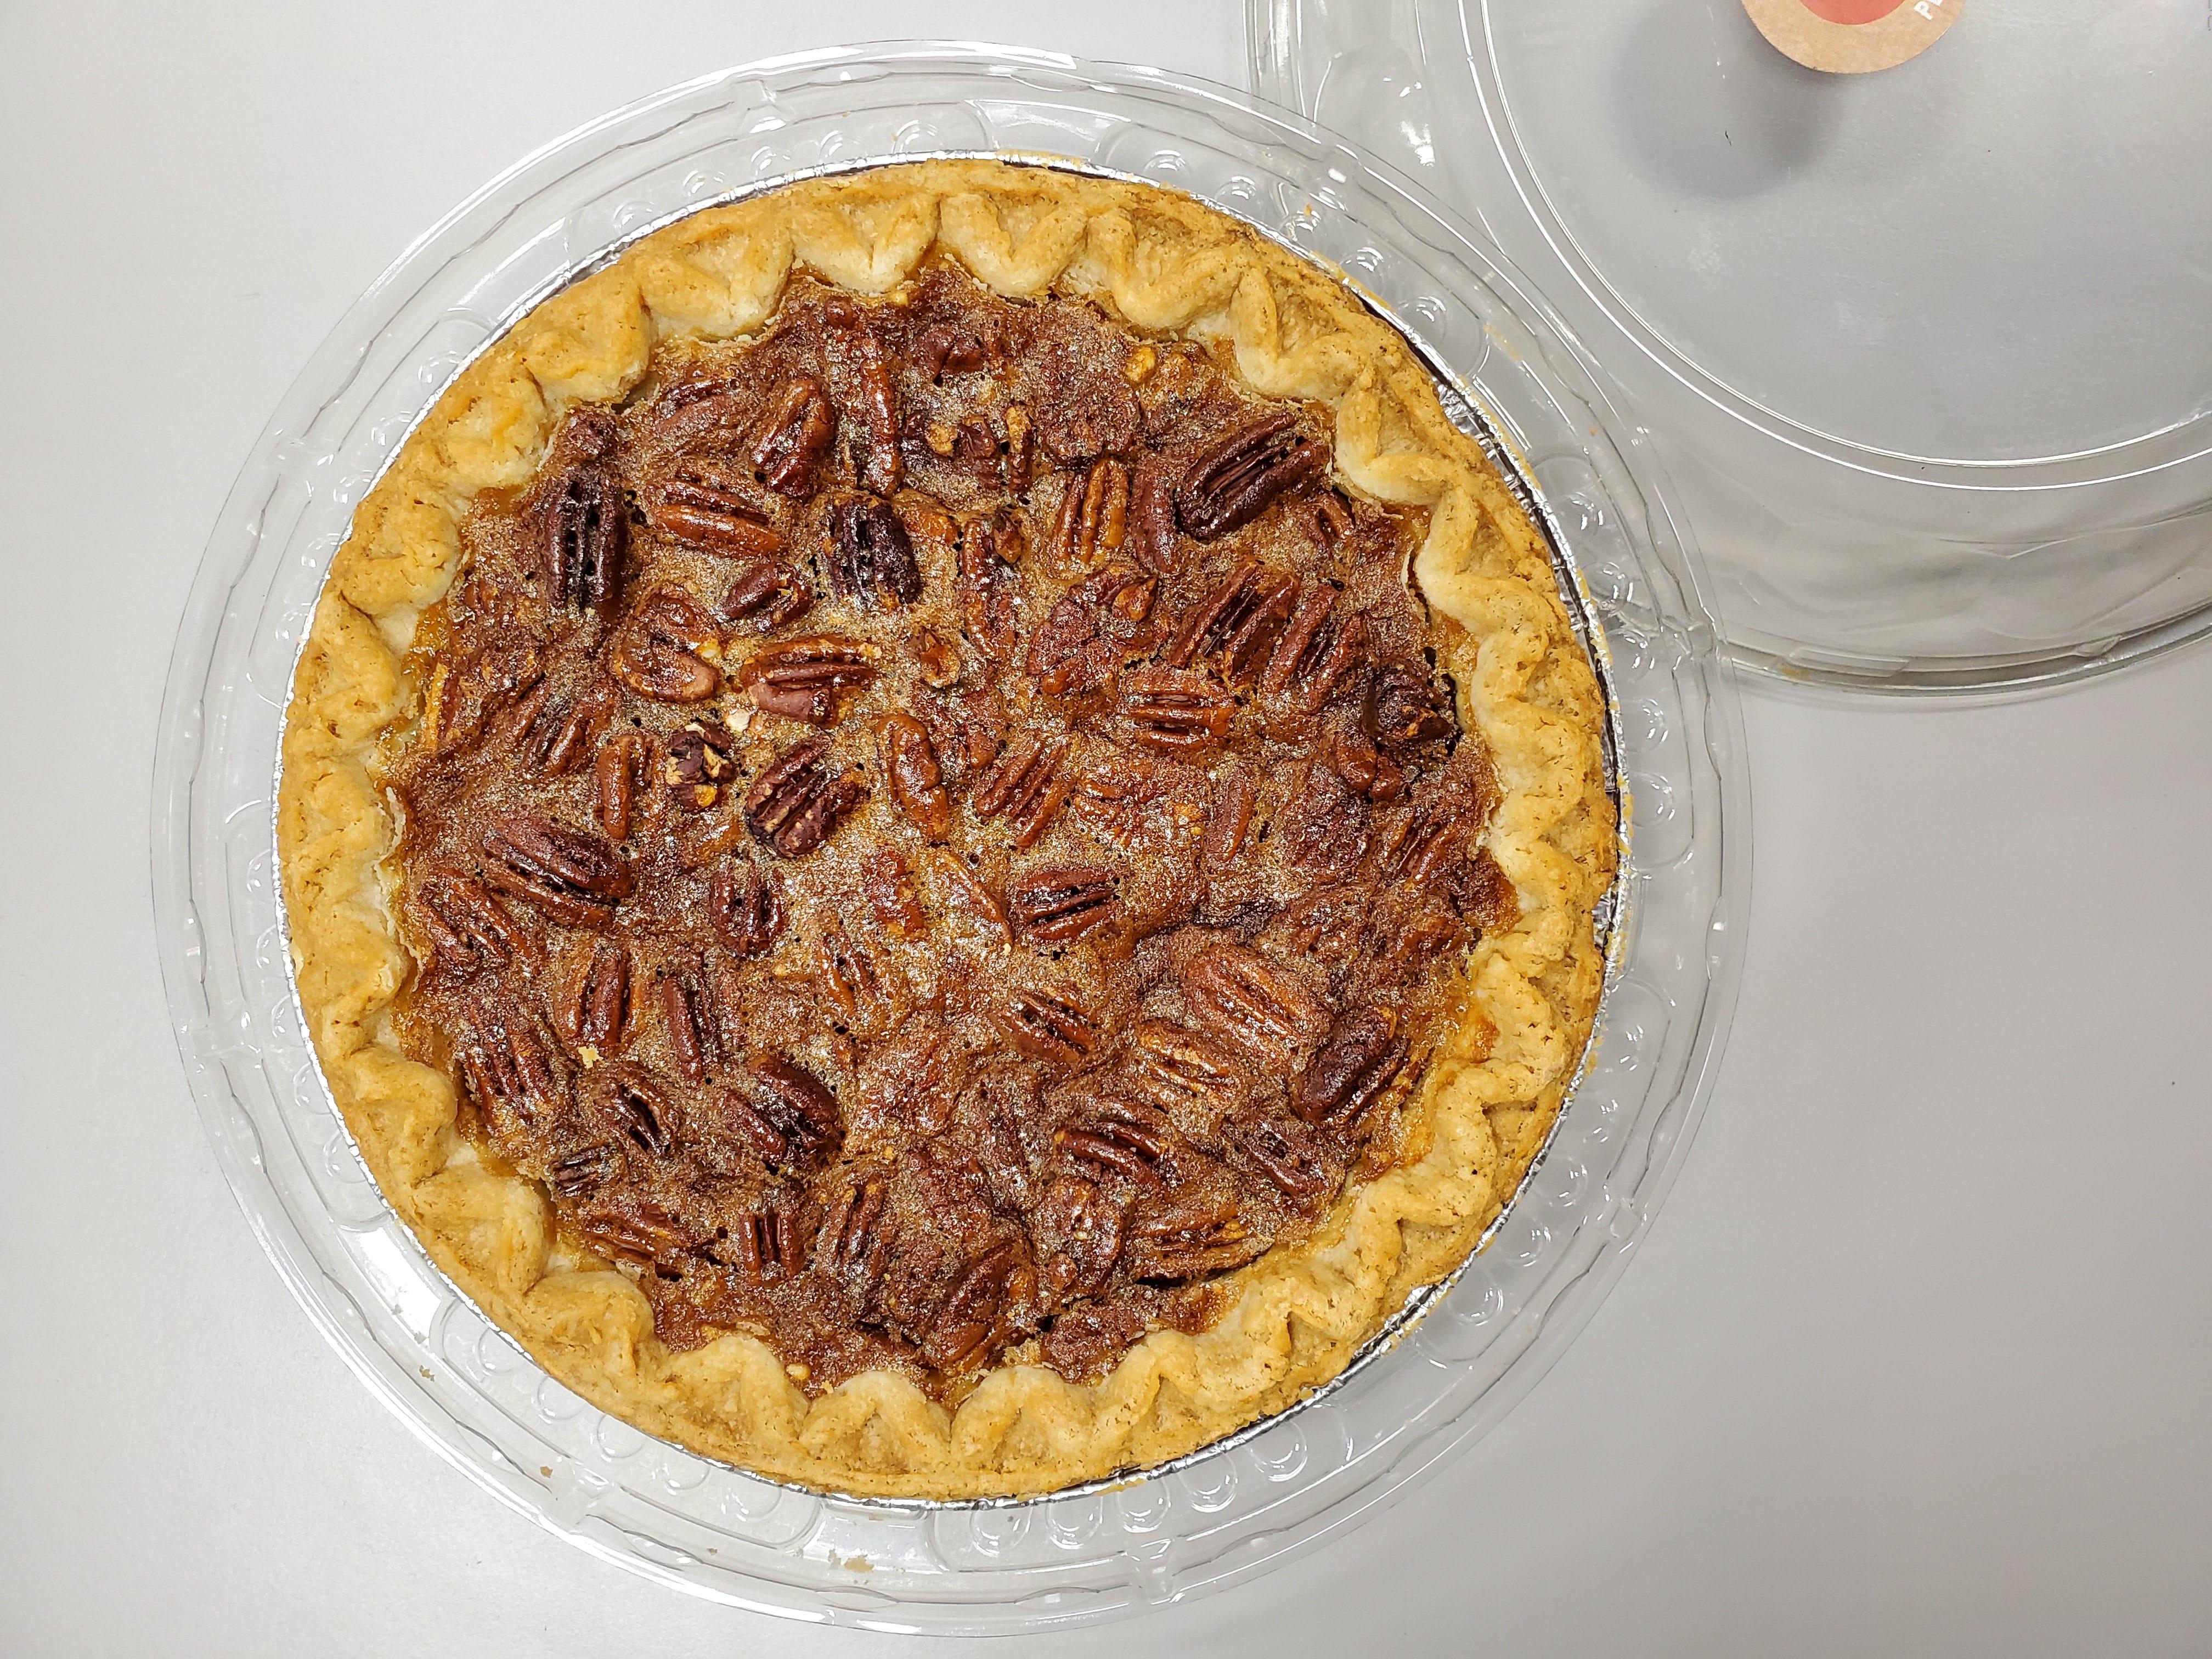 Pecan pie from Harris Teeter. $5.99 for a 19-ounce pie.